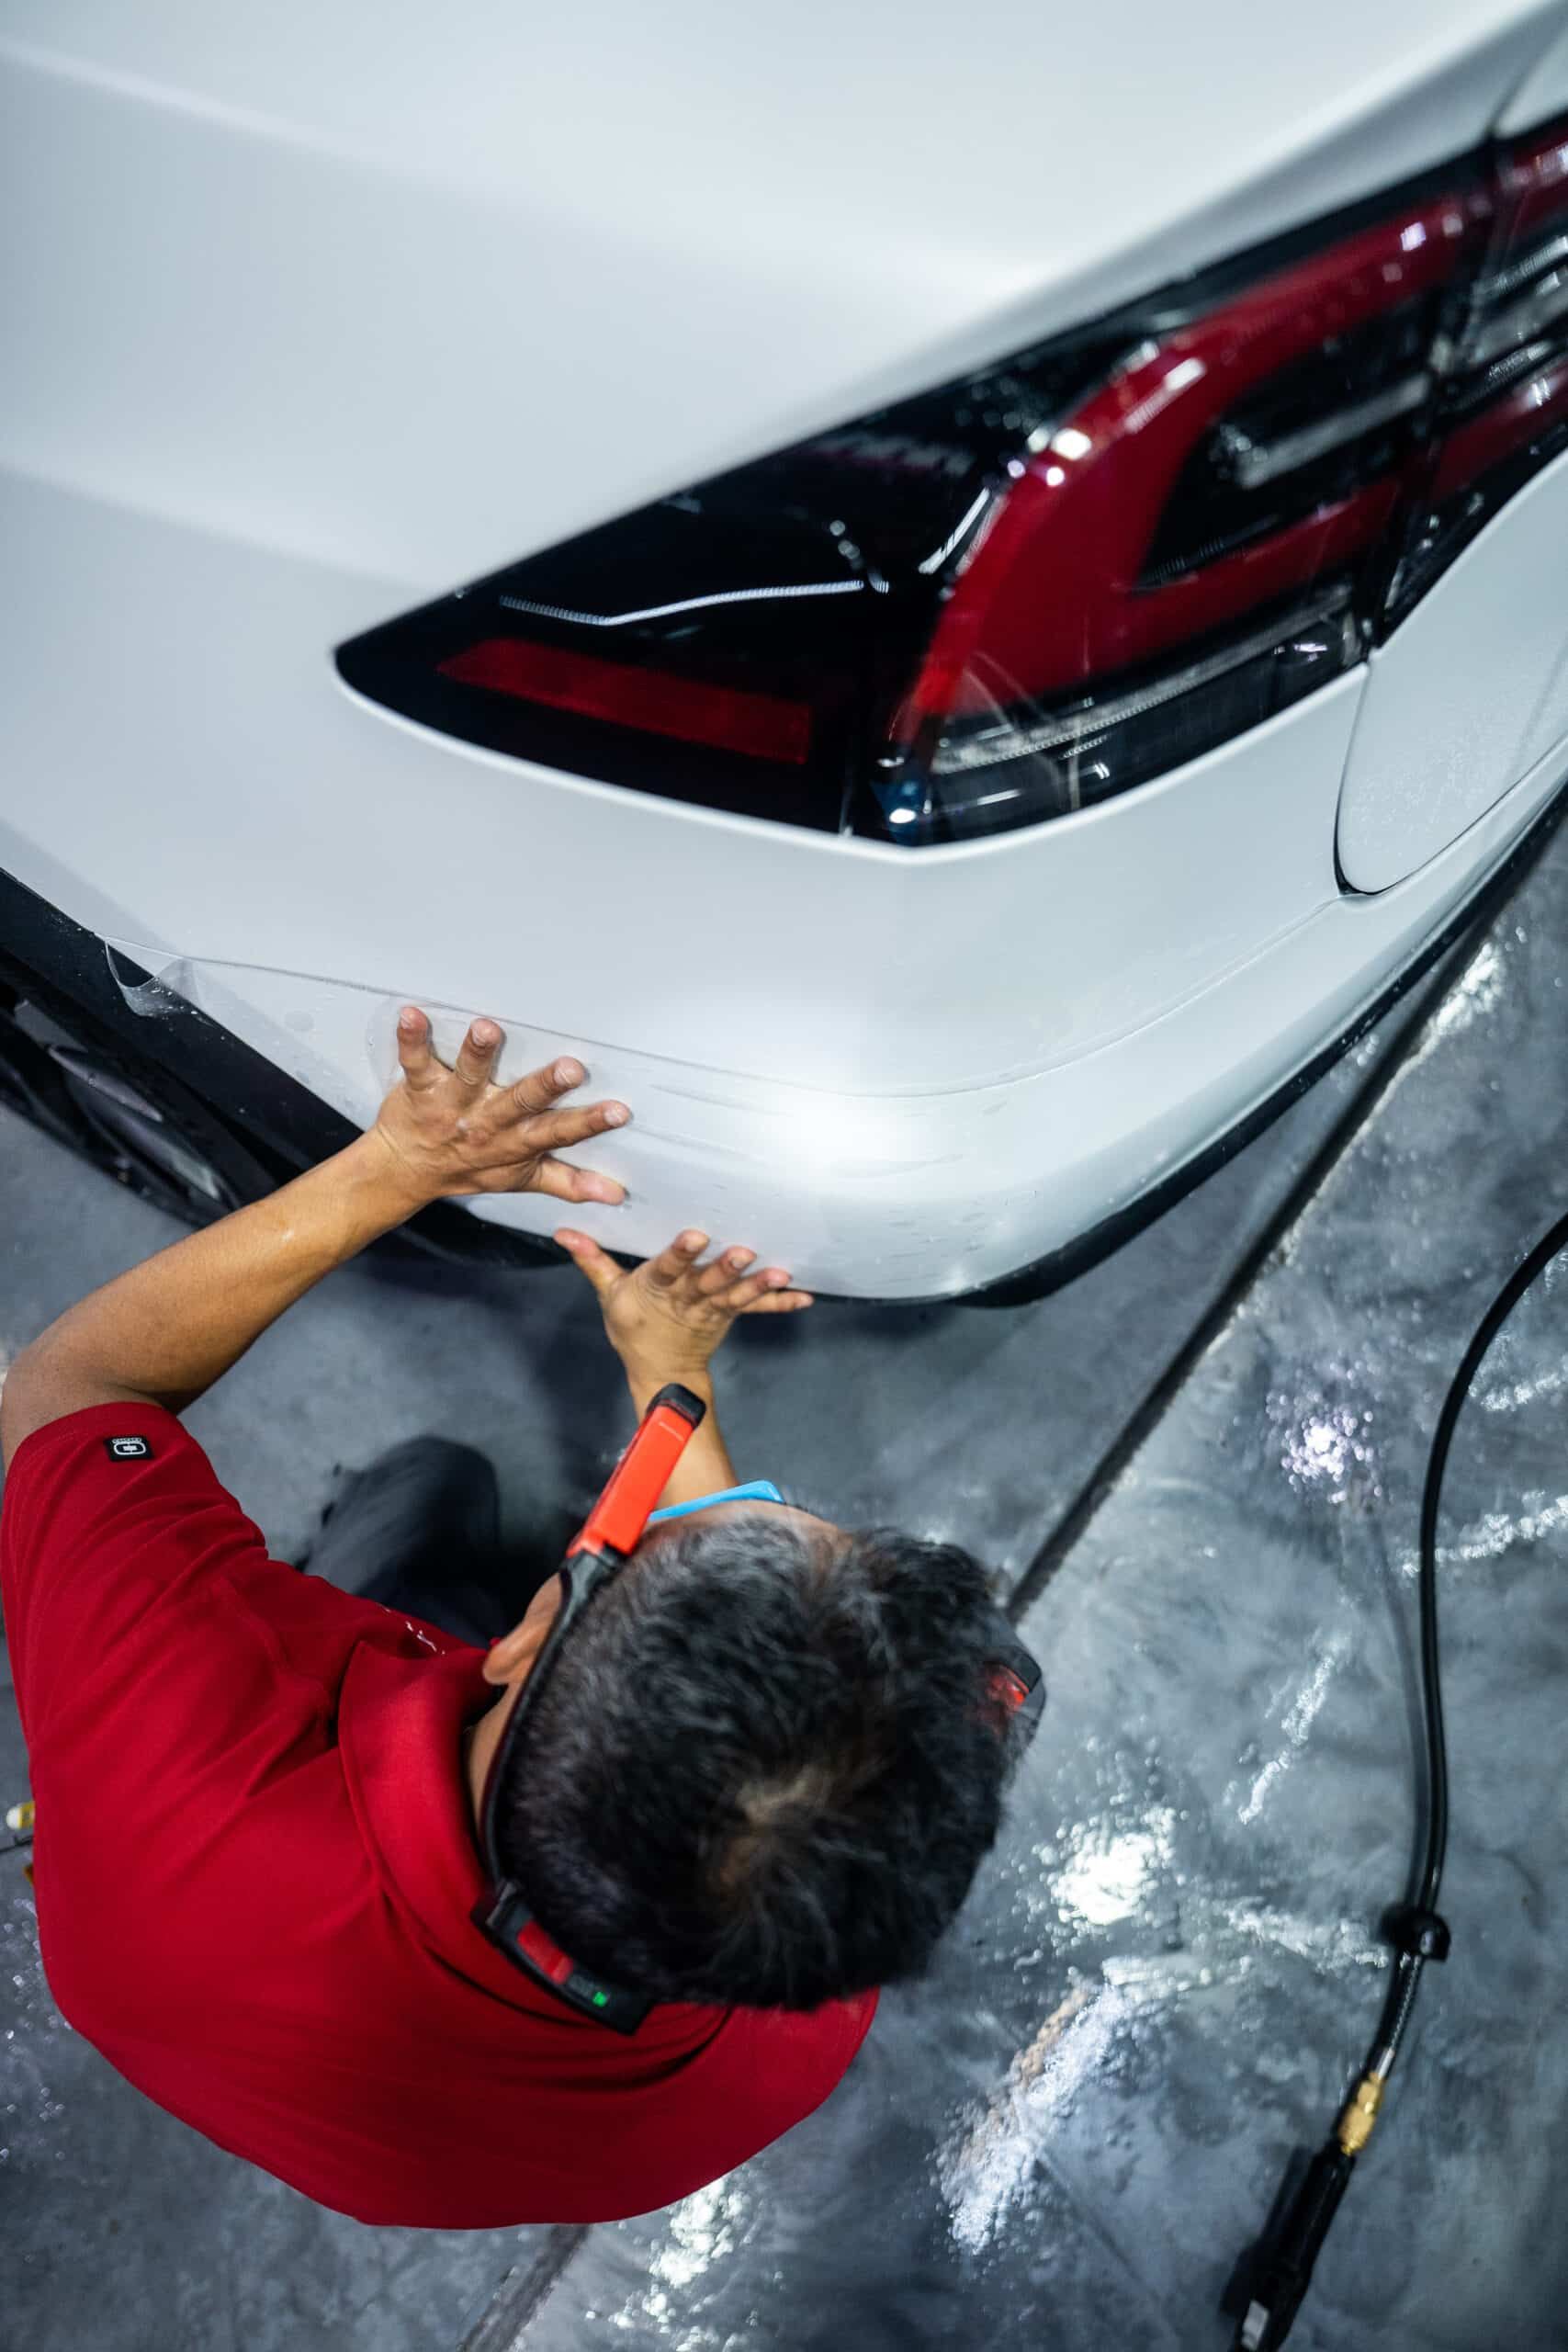 A man in a red shirt is working on the back of a white car.